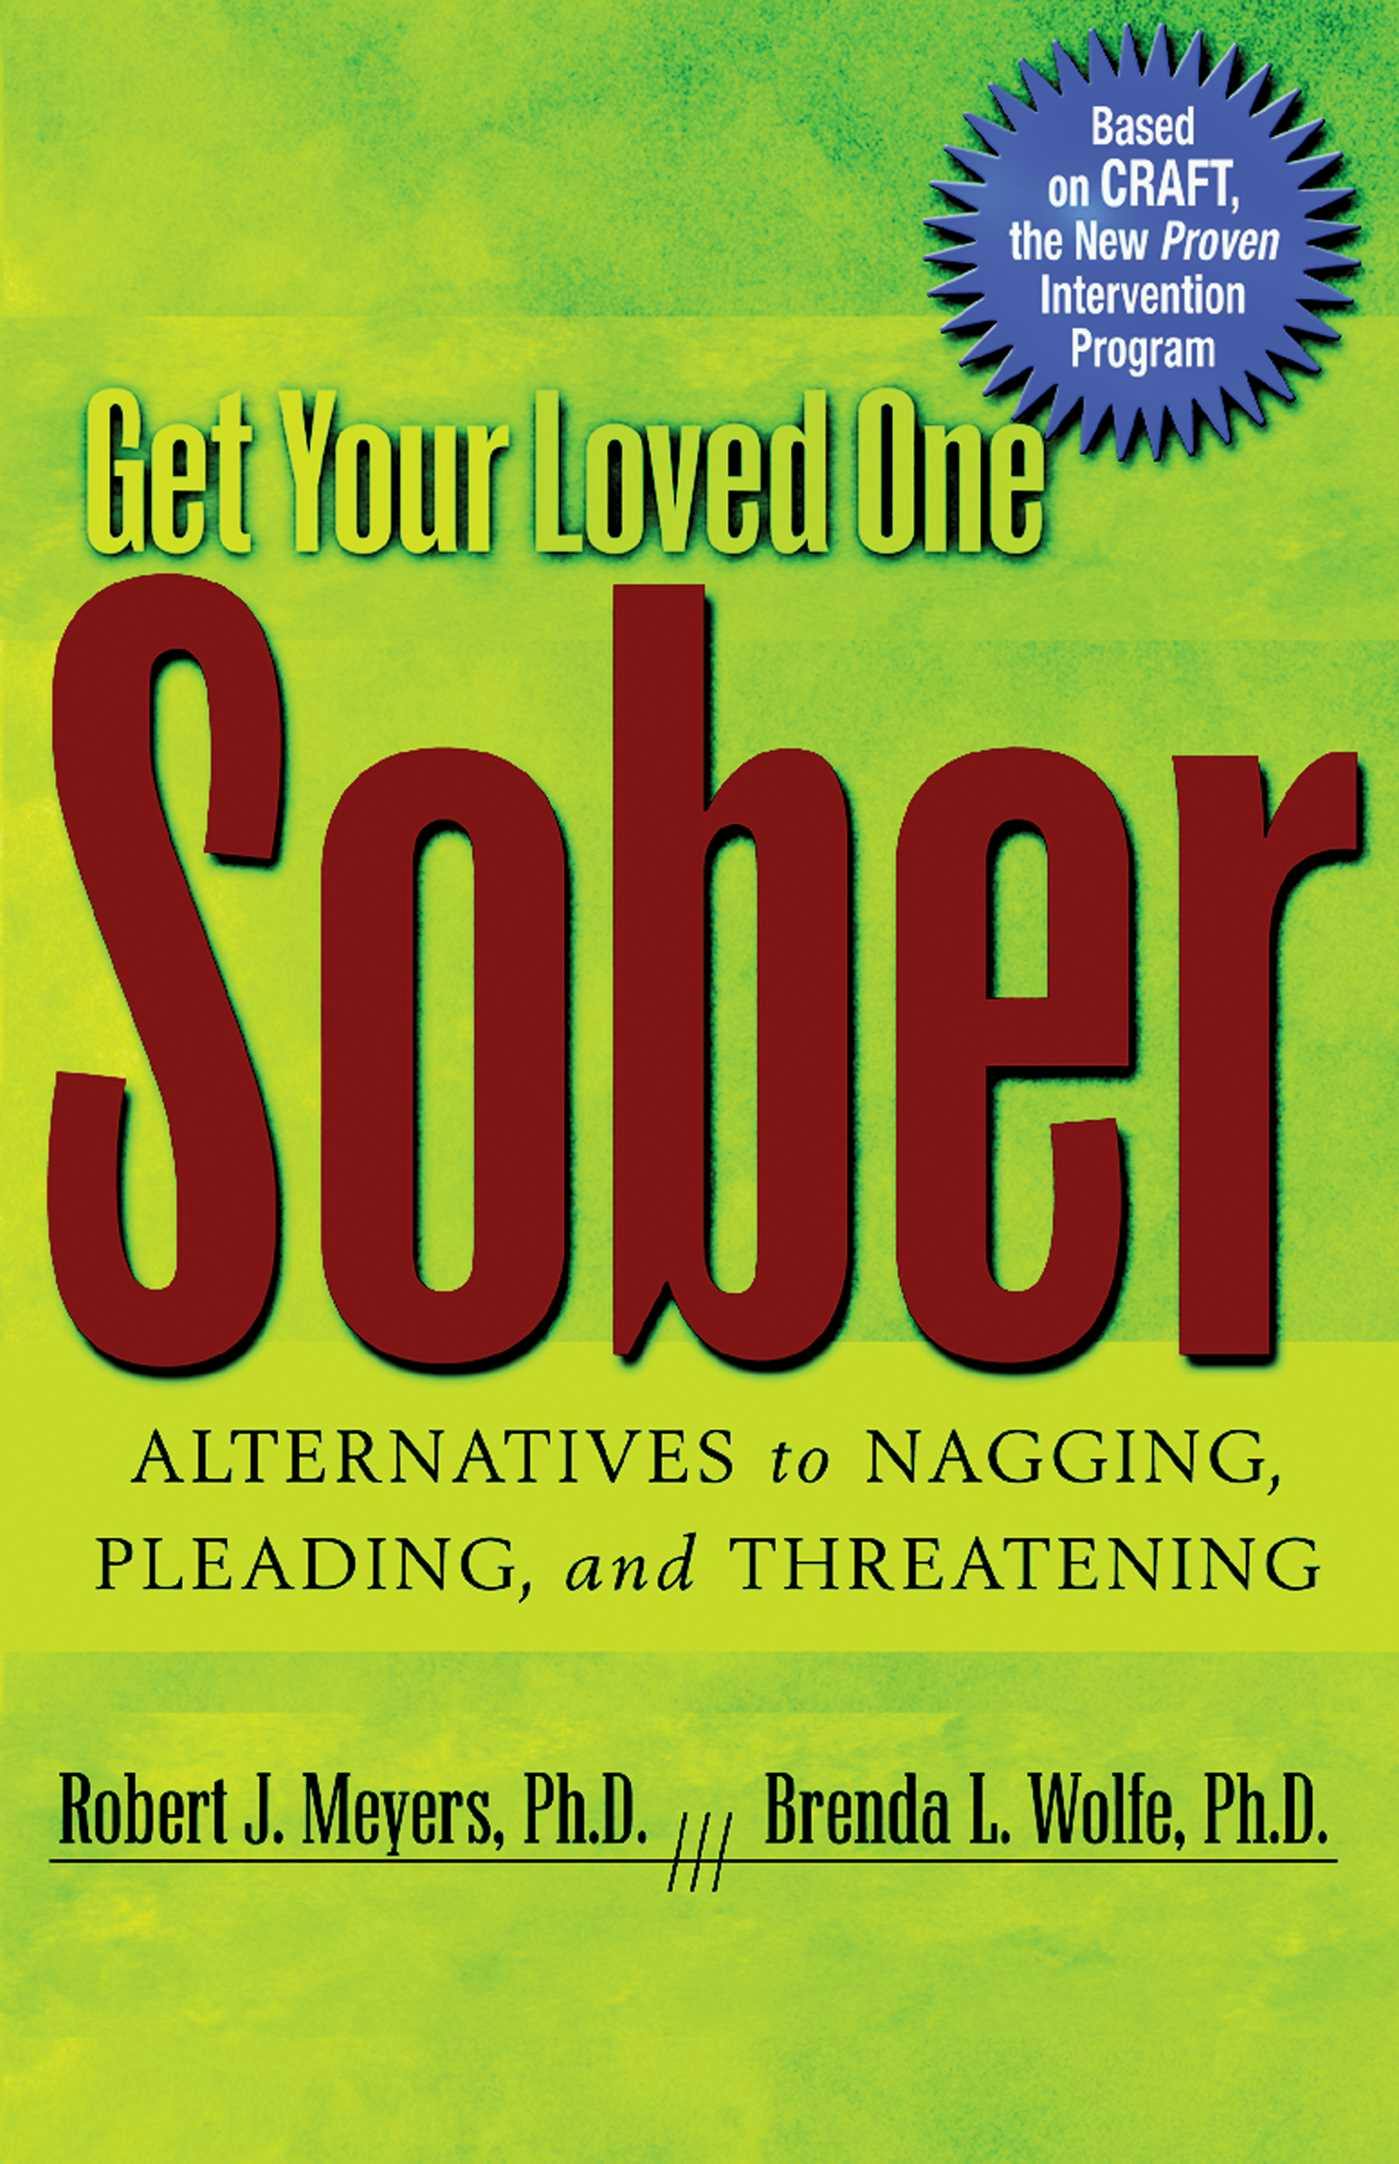 Get Your Loved One Sober: Alternatives to Nagging, Pleading, and Threatening - Robert J Meyers, Brenda L. Wolfe